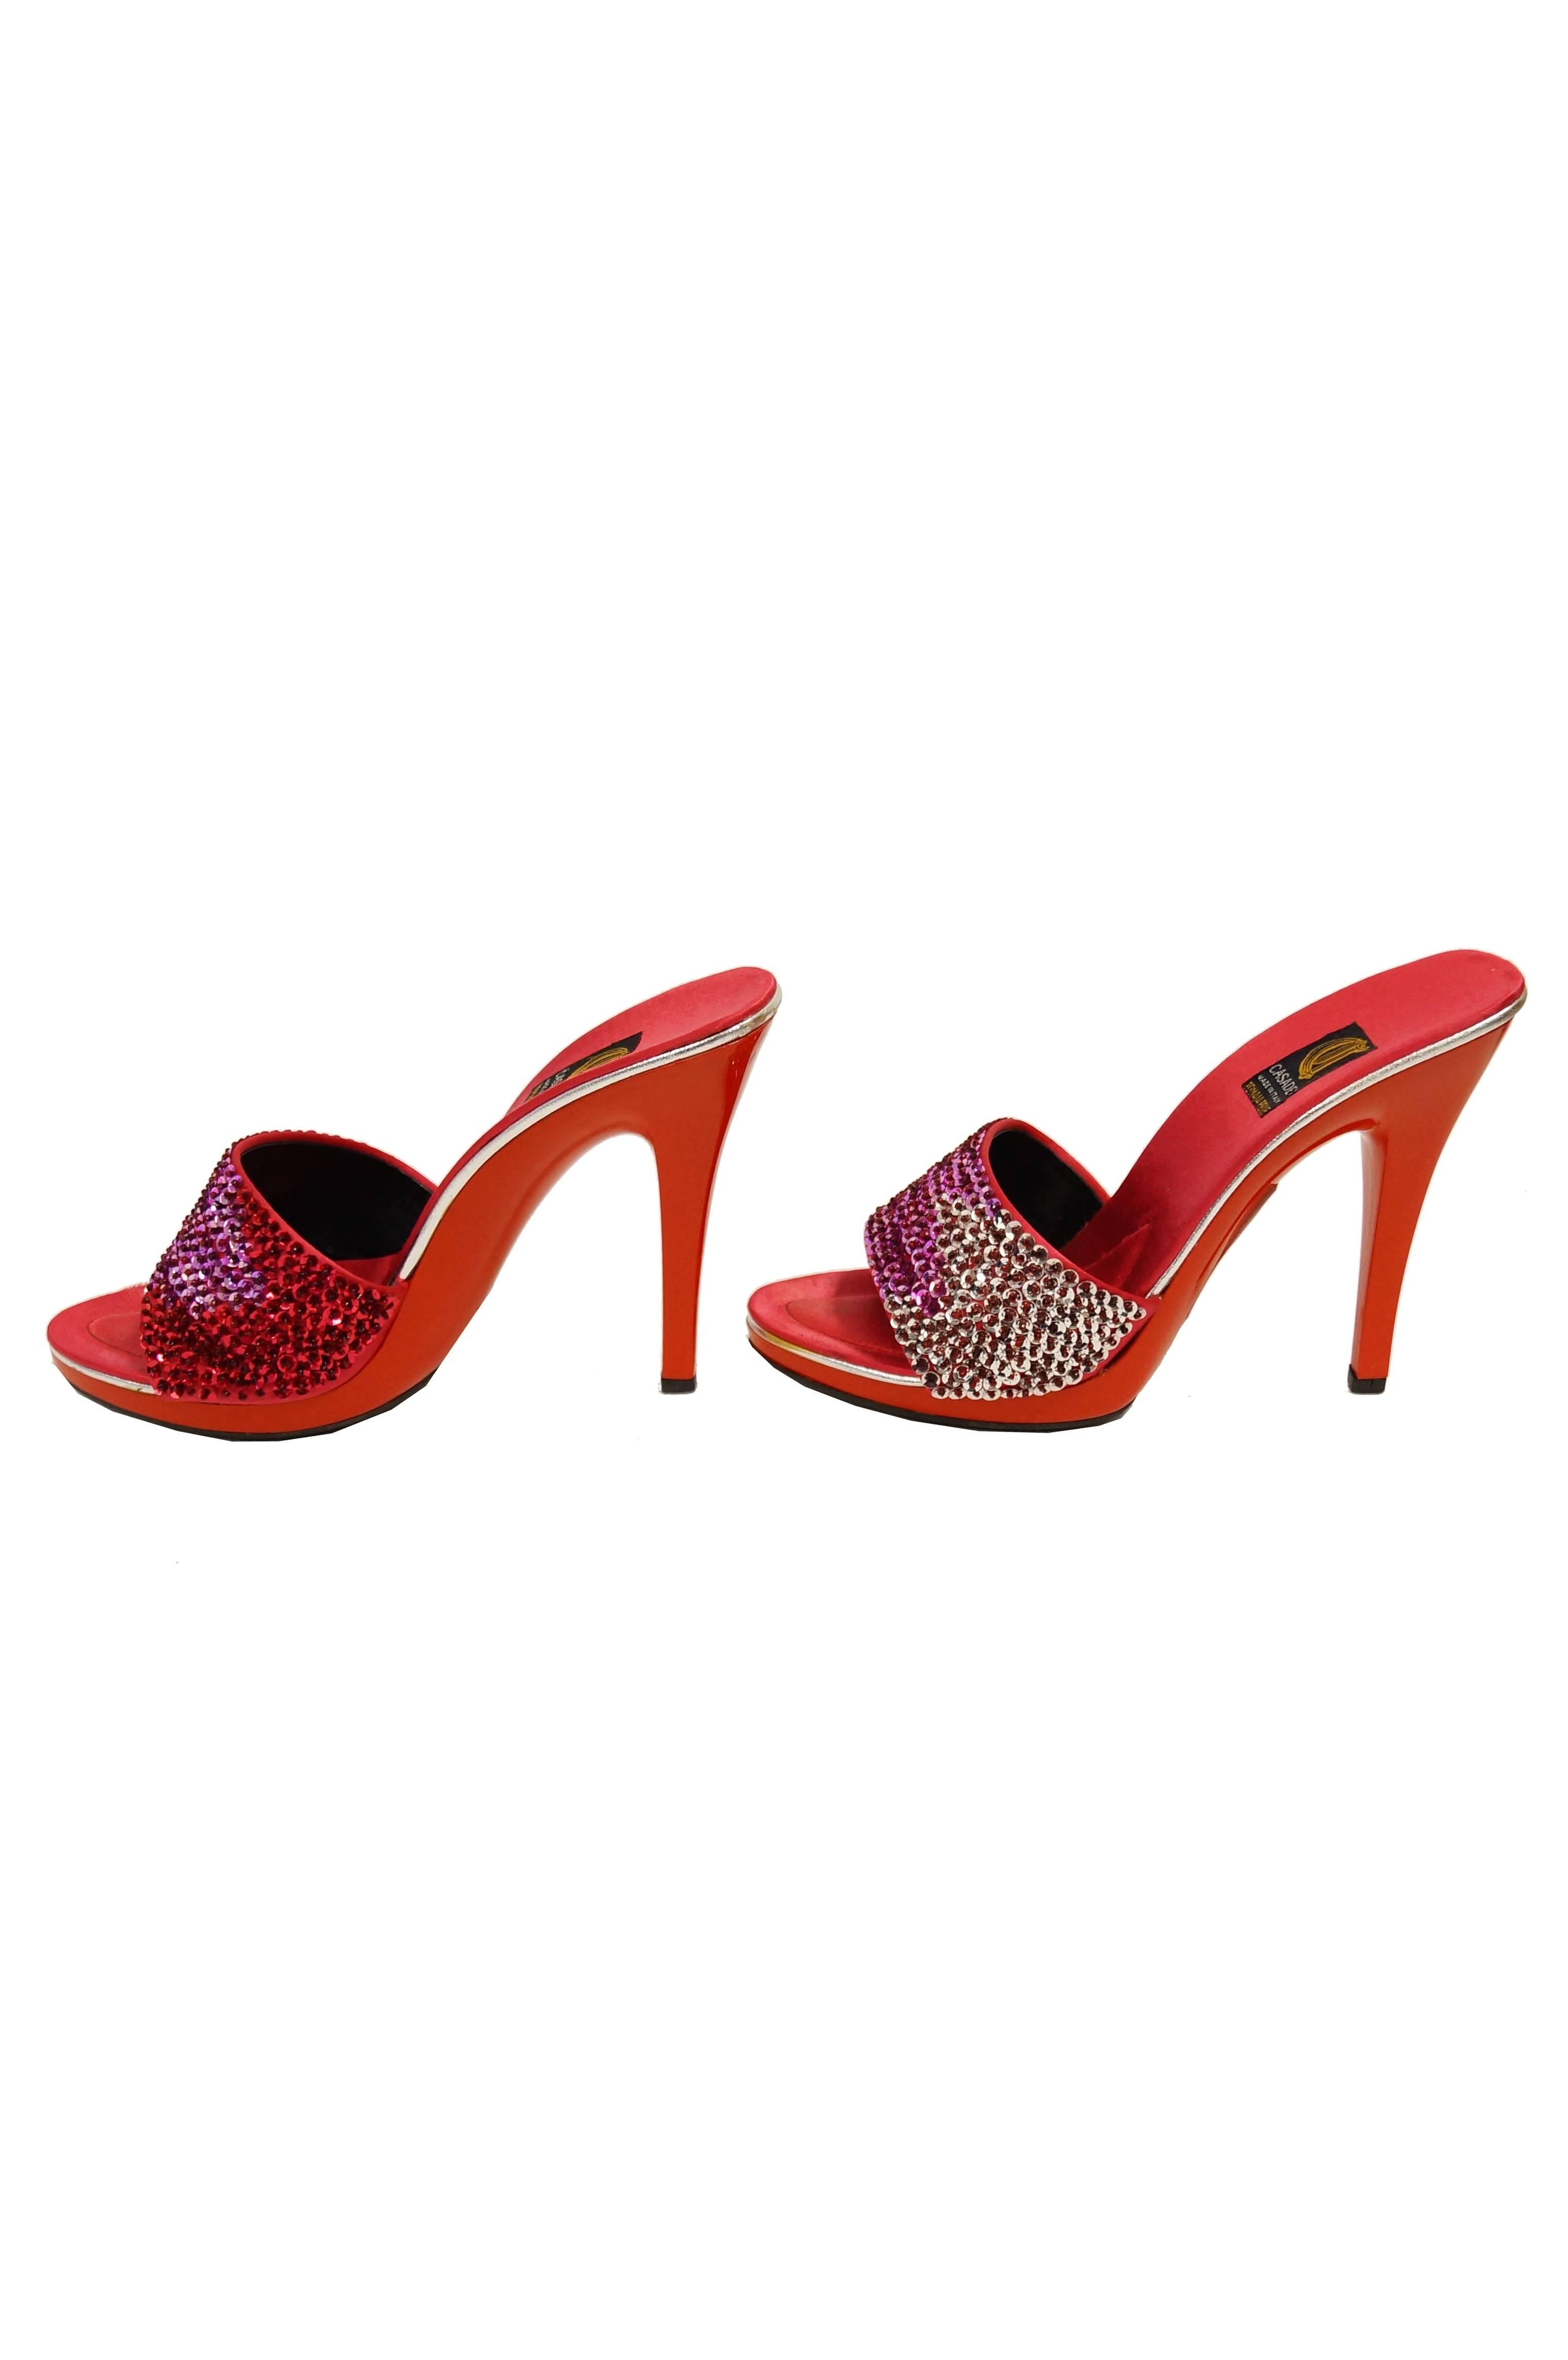 Casadei Red Satin and Sequin Sandals In Excellent Condition For Sale In Houston, TX